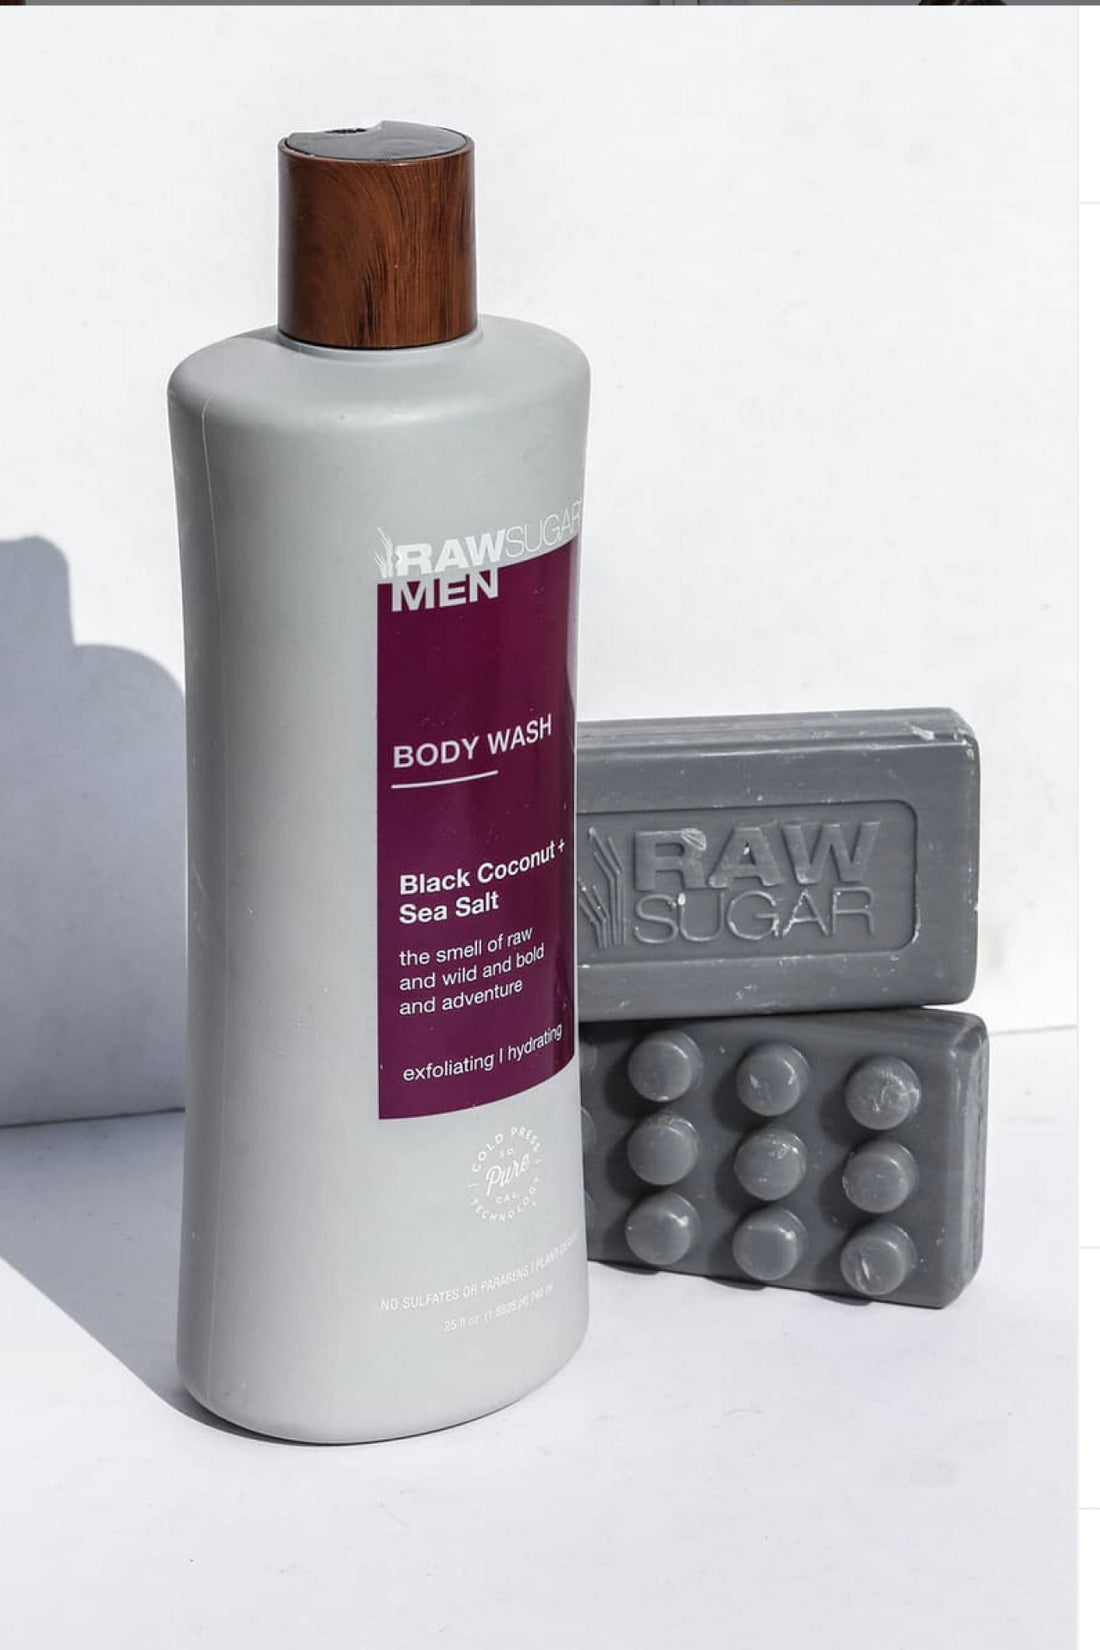 Men's Body Wash with Two Bars of Soap Next to it